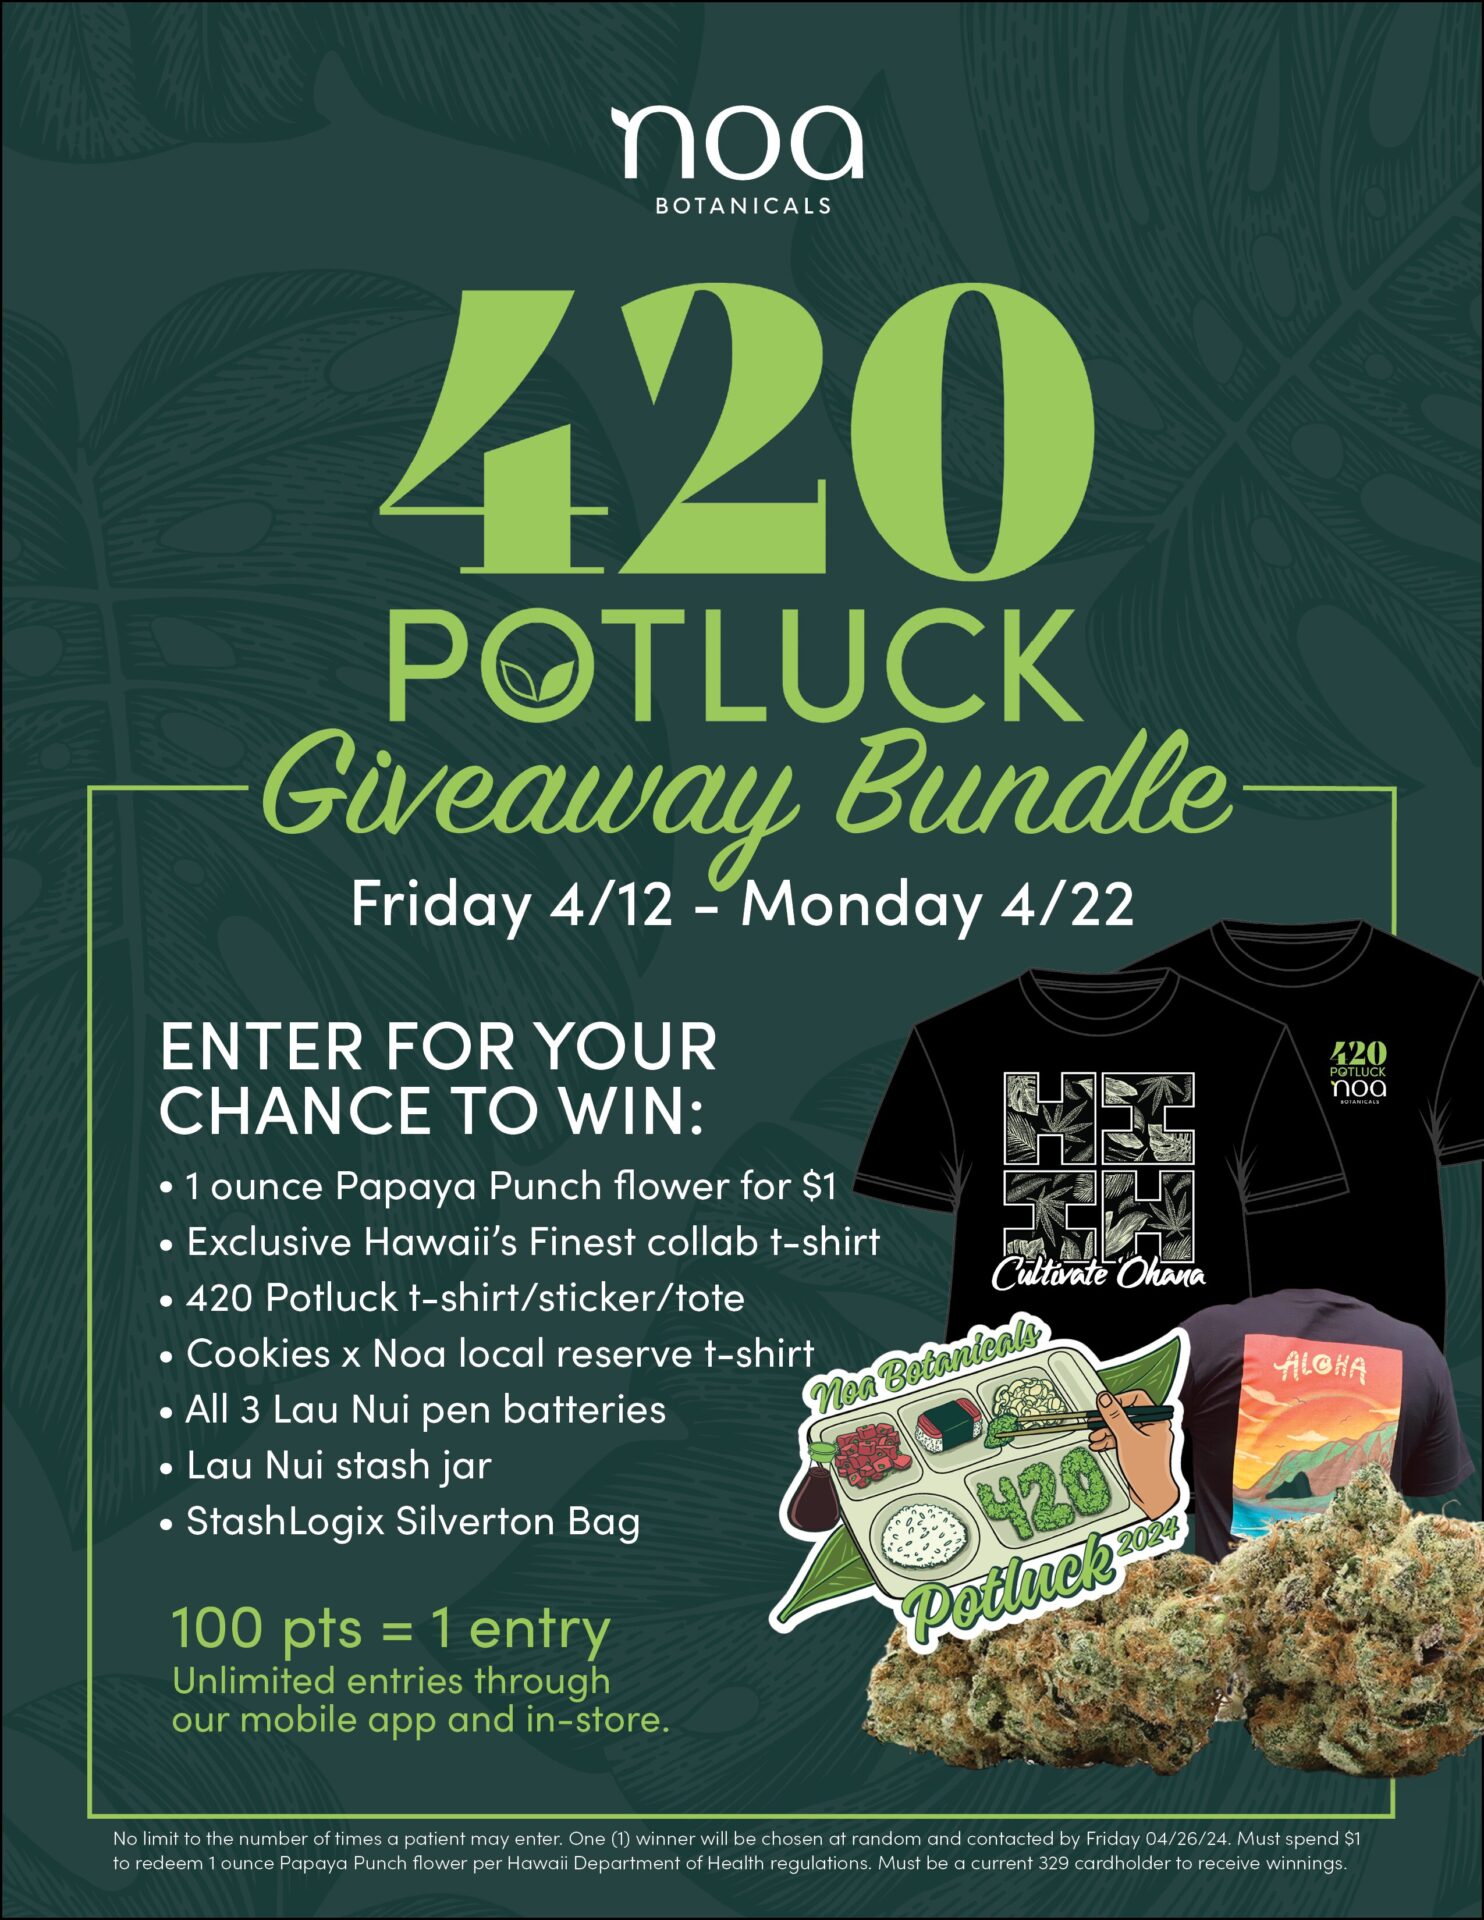 Promotional flyer for nāeao botanicals' "420 potluck giveaway bundle," featuring details about prizes including t-shirts and exclusive cannabis strains, with entry guidelines and colorful botanical graphics.